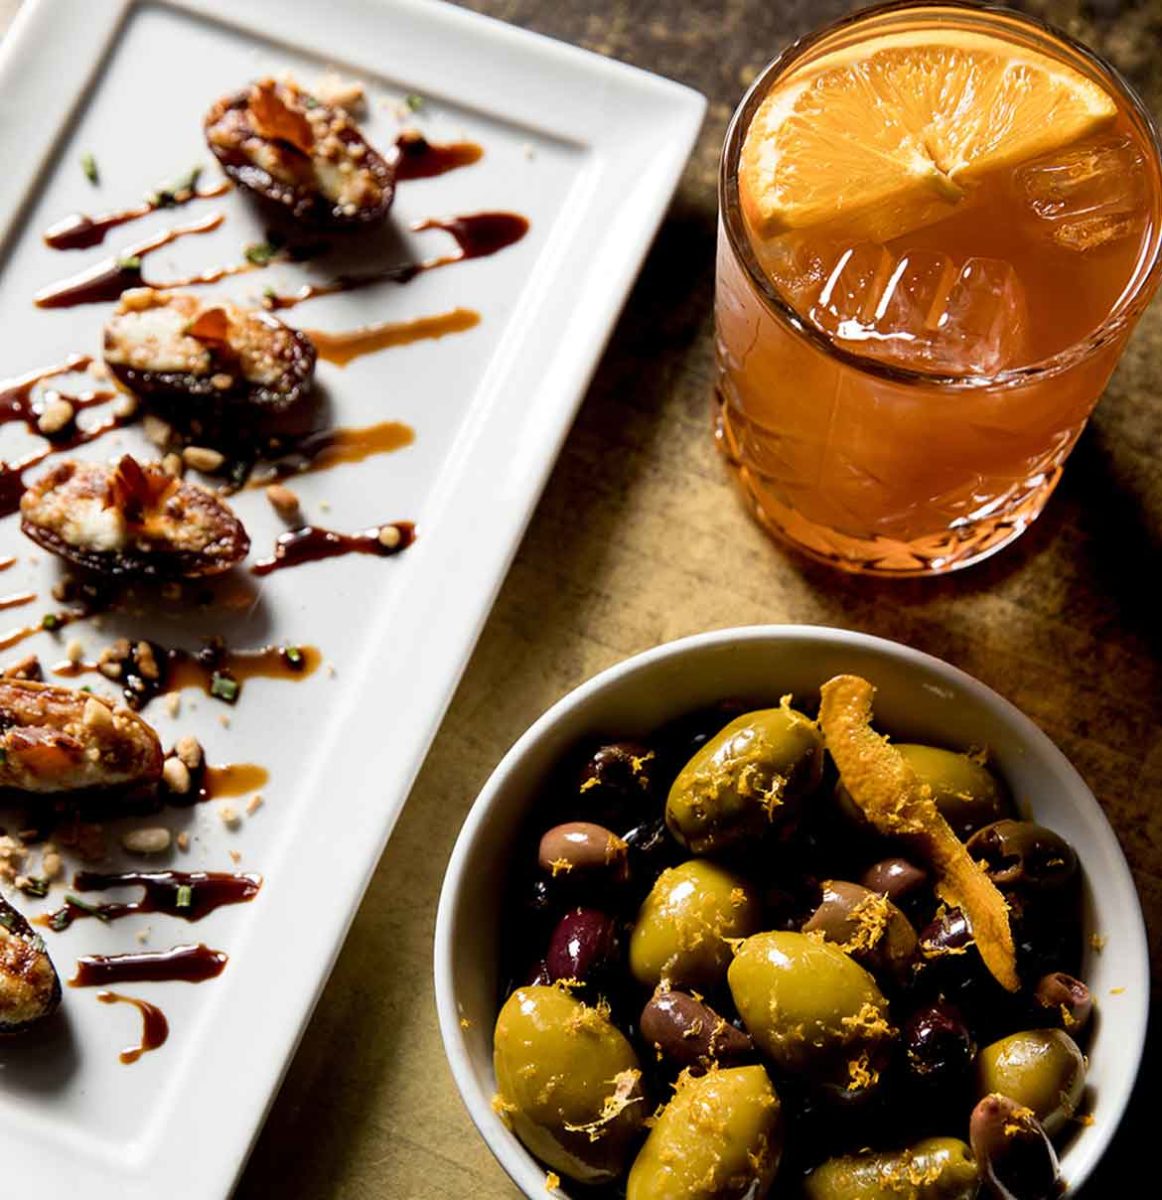 marinated olives and gorgonzola stuffed dates alongside a cocktail at the brass bar in our loft.